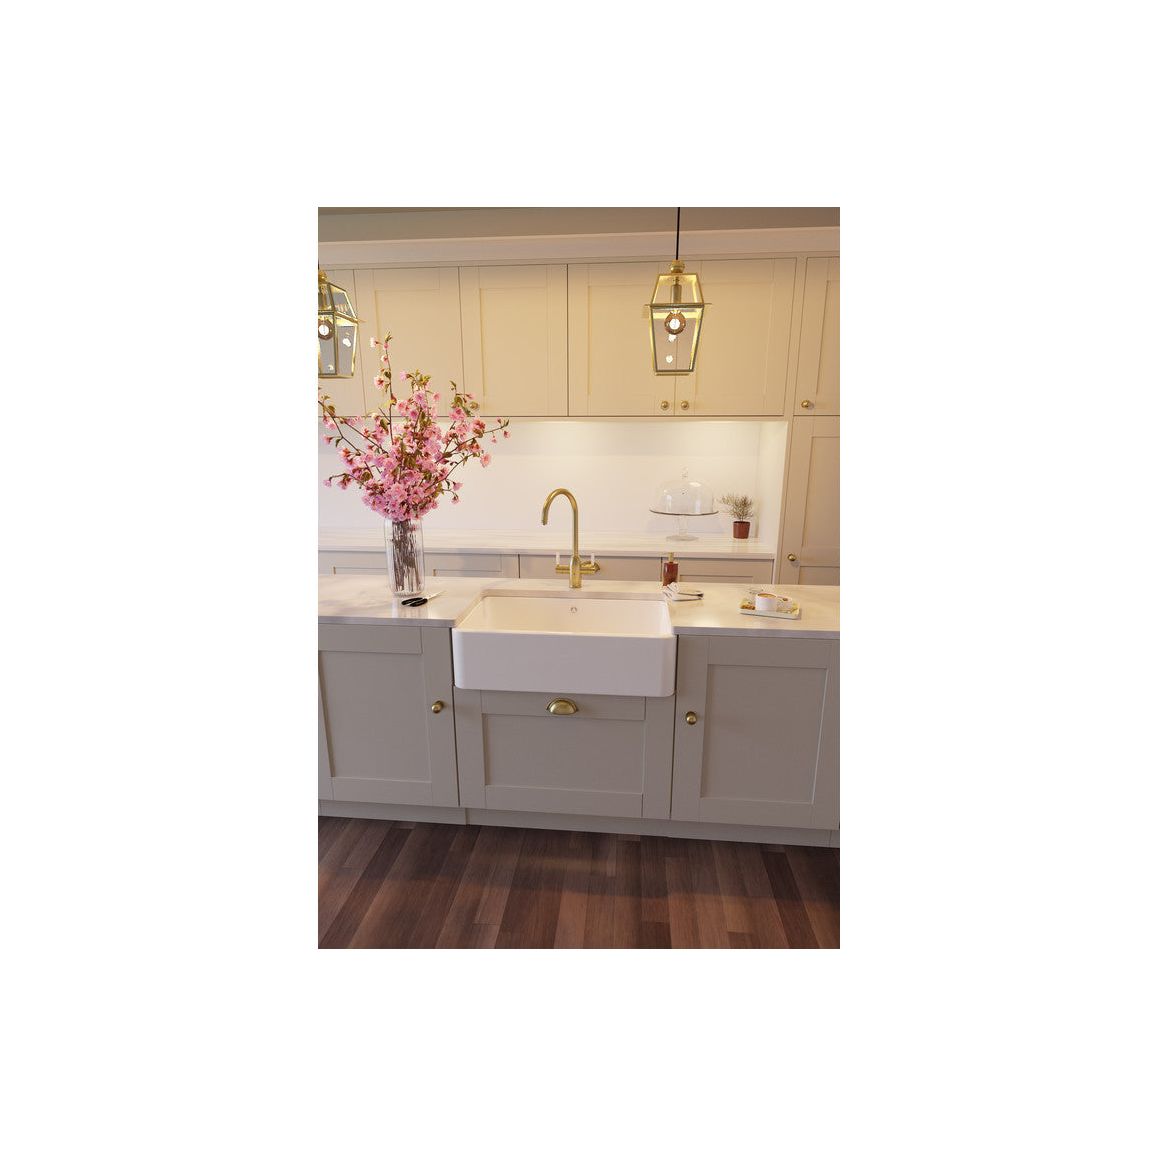 Abode Provincial Large 1B Undermount Sink - White